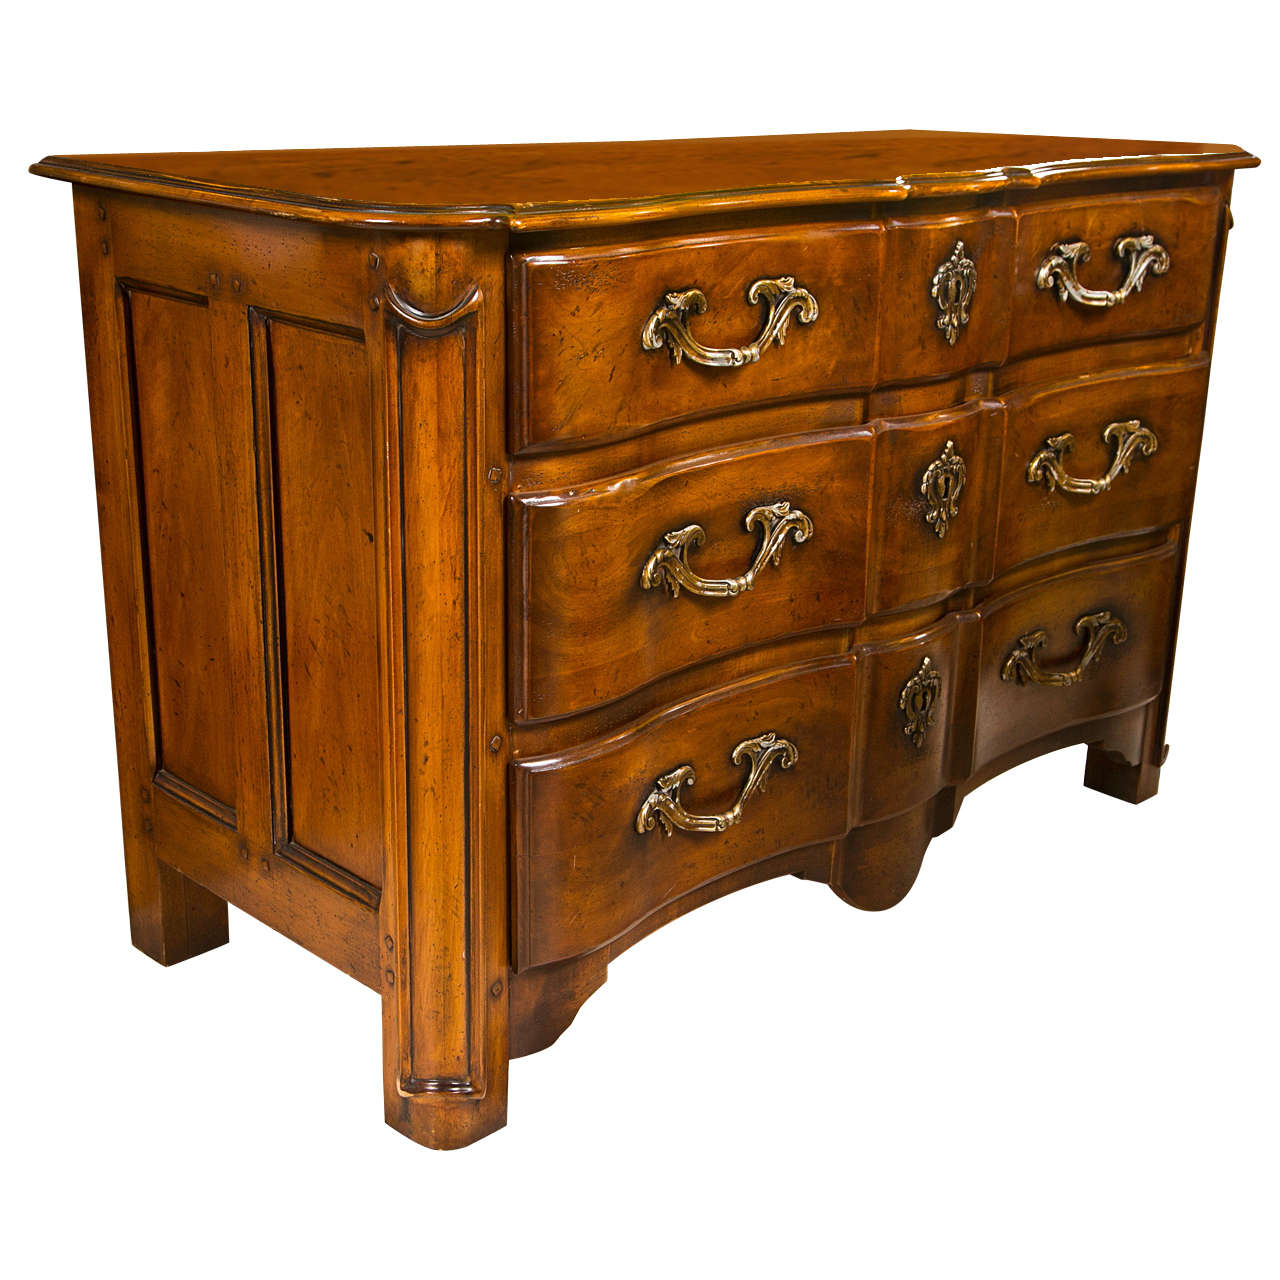 Ralph Lauren Chest of Drawers. at 1stdibs